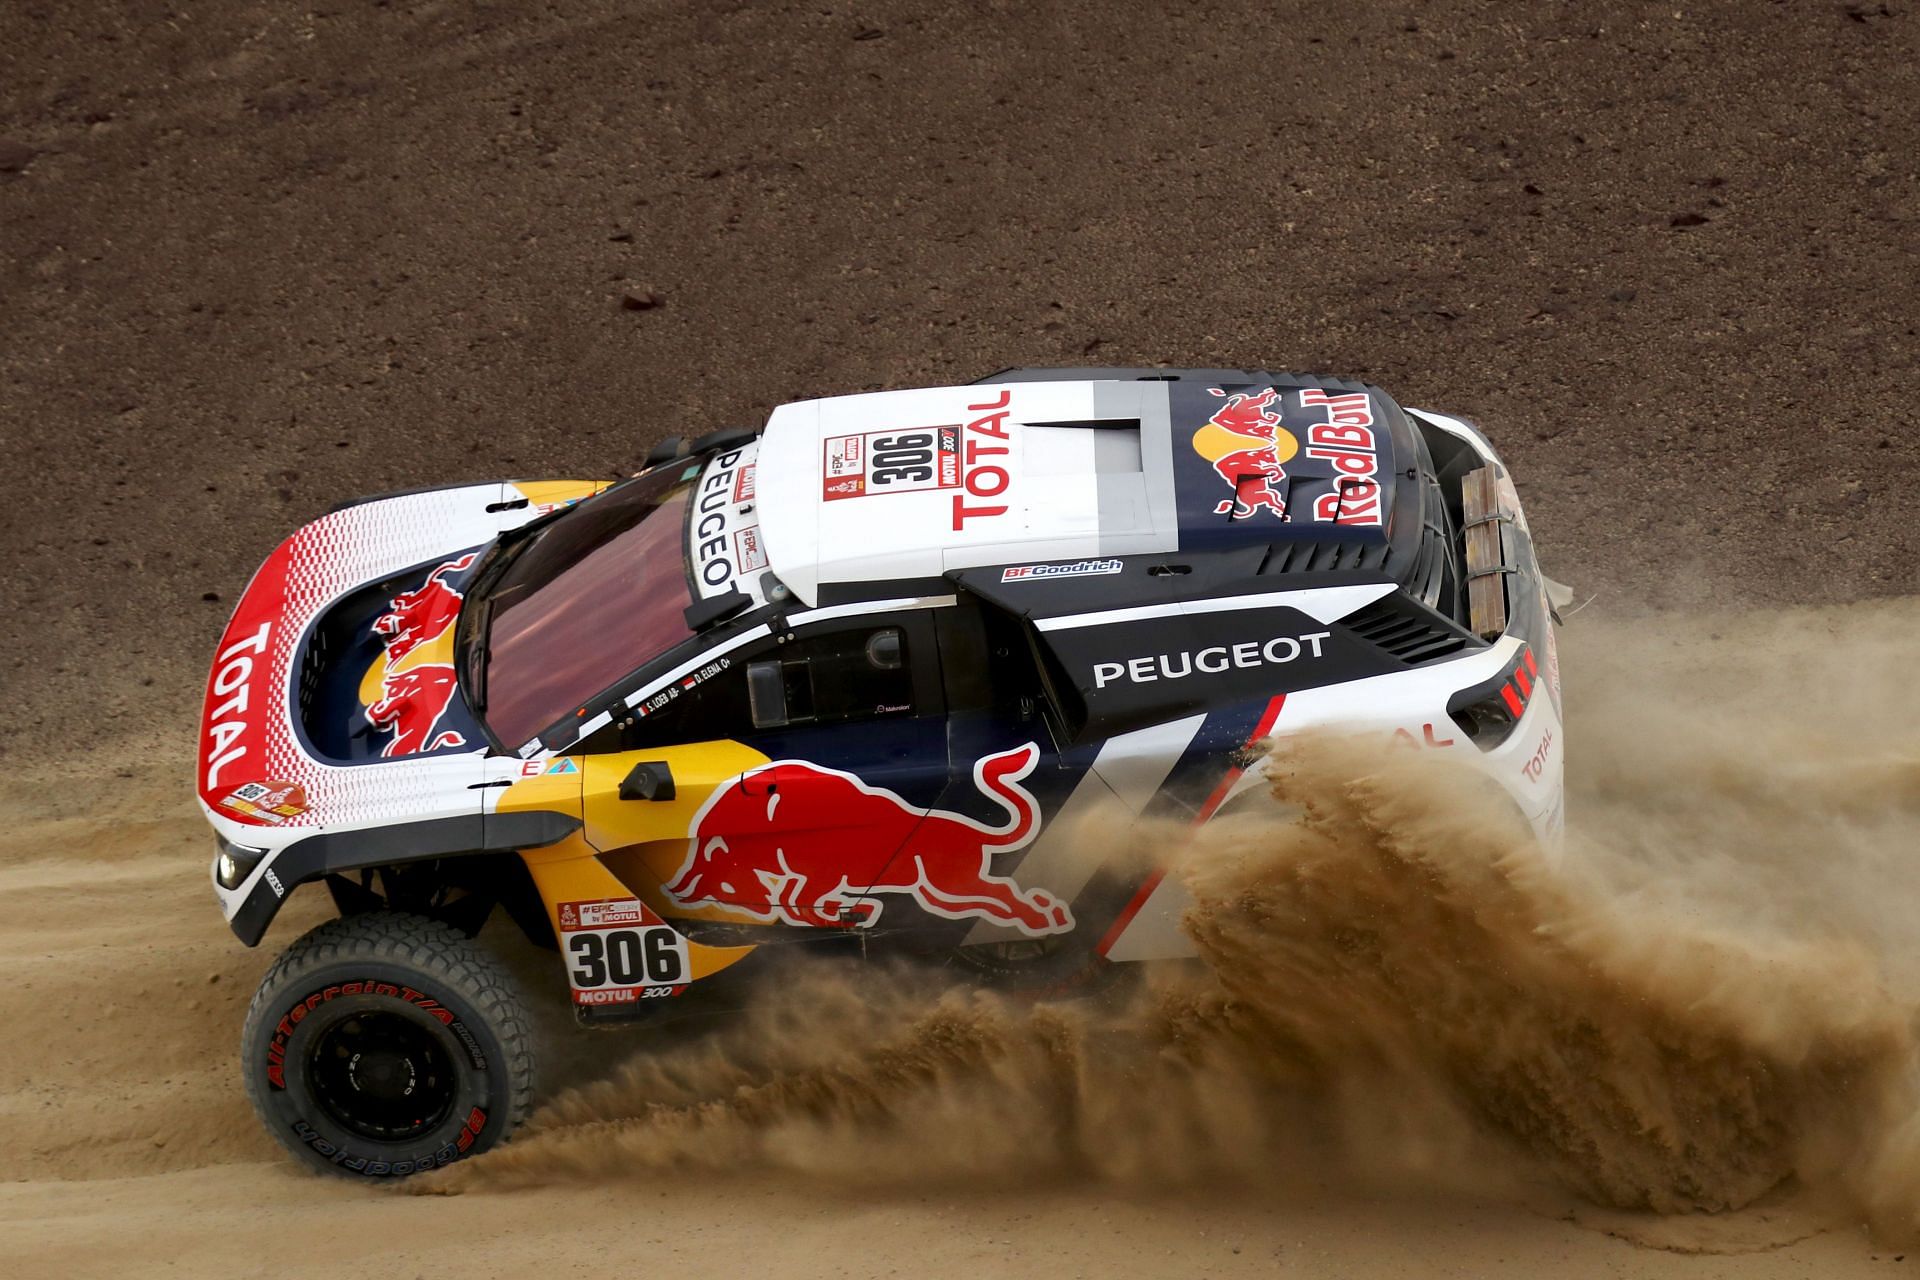 French carmaker Peugeot has been a name to reckon with in Dakar Rally, World Rallycross Championship, and many other motorsports events (Photo by Dan Istitene/Getty Images)